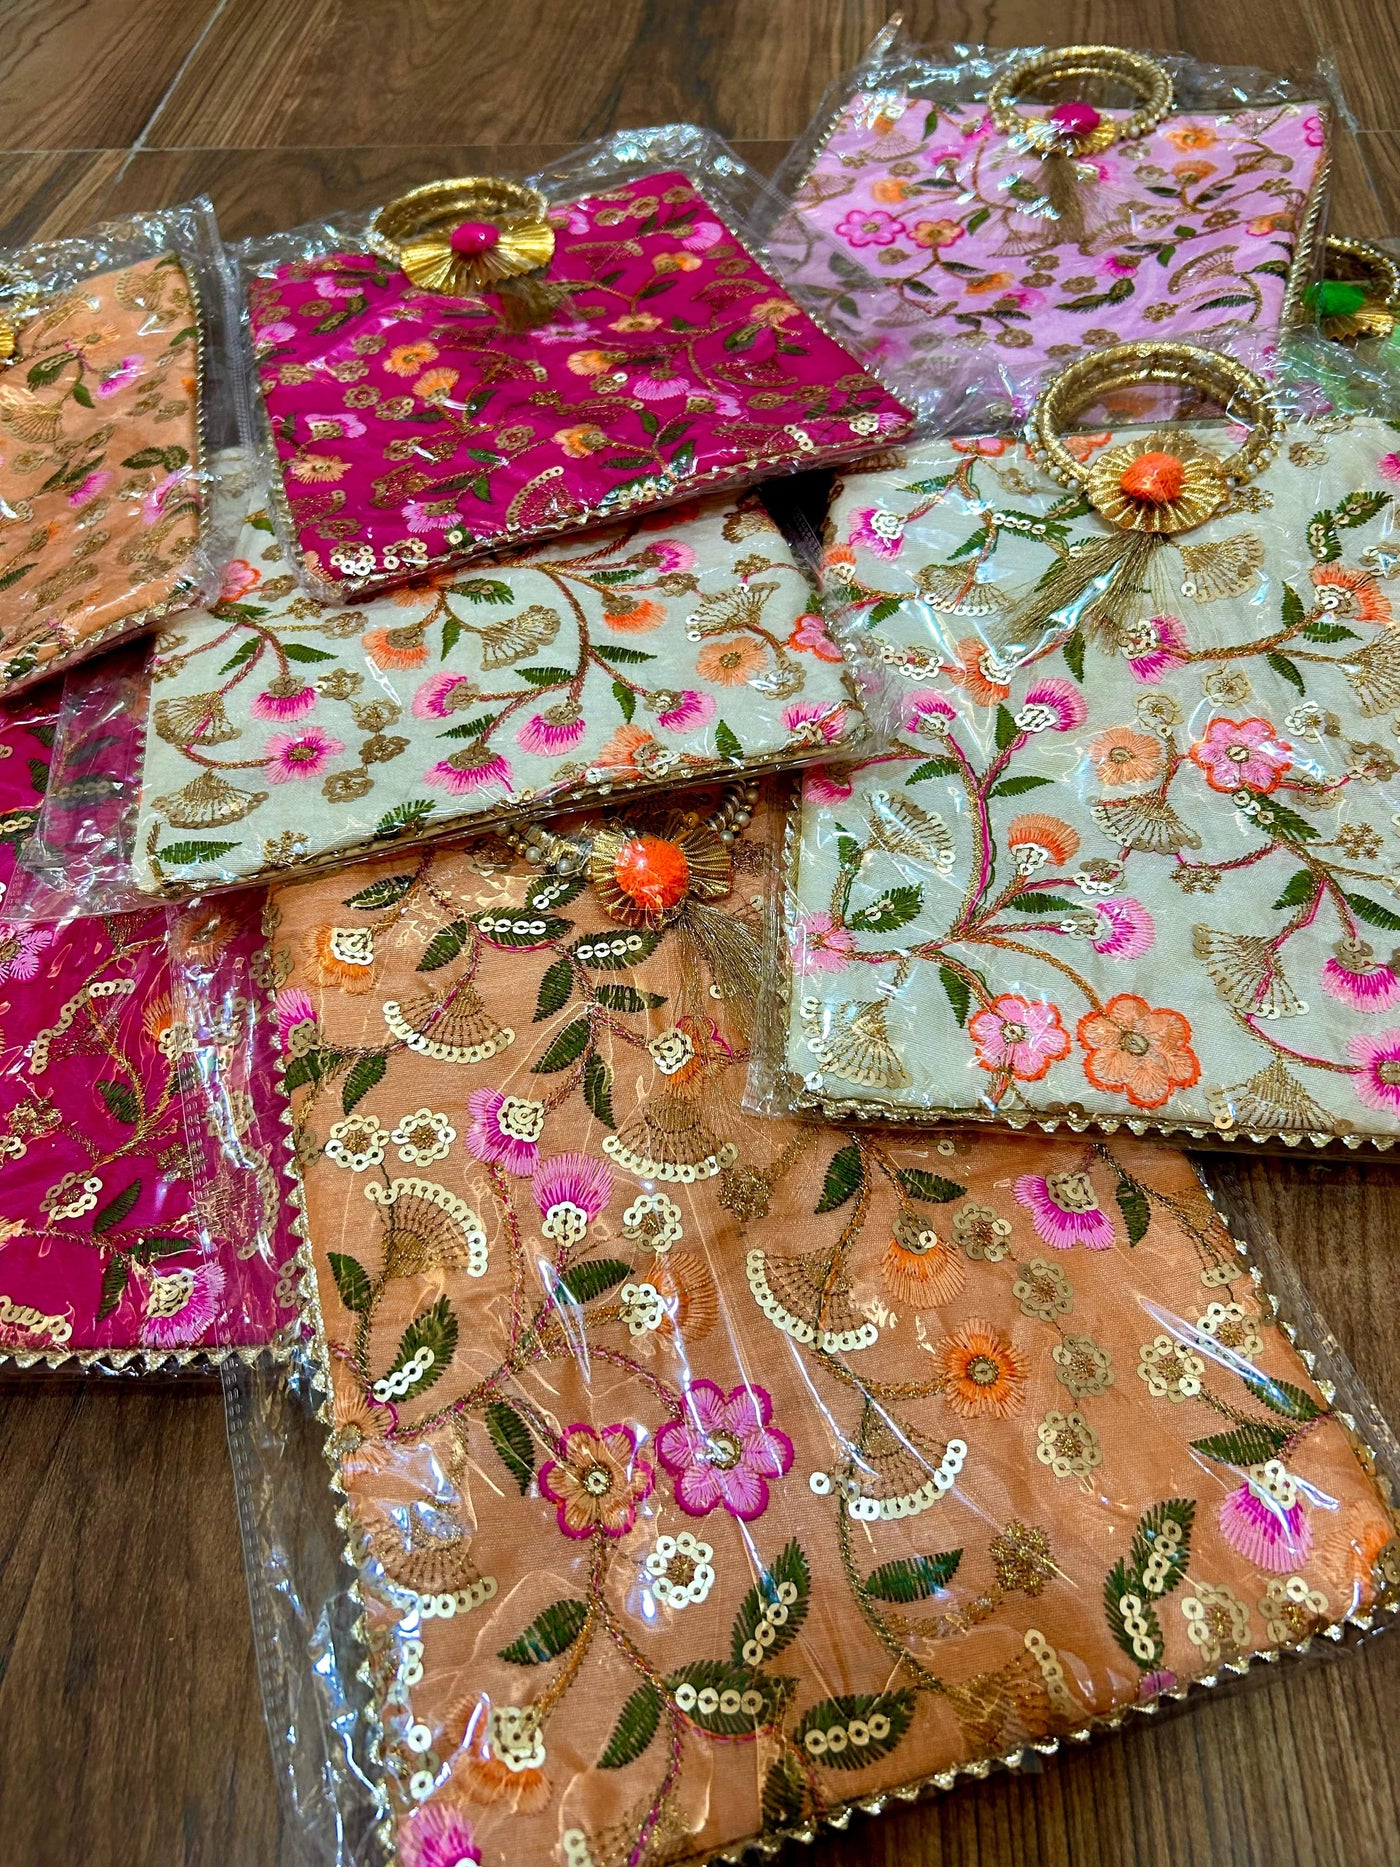 100 Rs each on buying 🏷 50+ qty | Call 📞 at 8619550223 gift hand bag LAMANSH Floral 🌸 embroidery hand bags for haldi mehendi sangeet wedding return gifts 🎁 / Pooja or festival ceremony favours